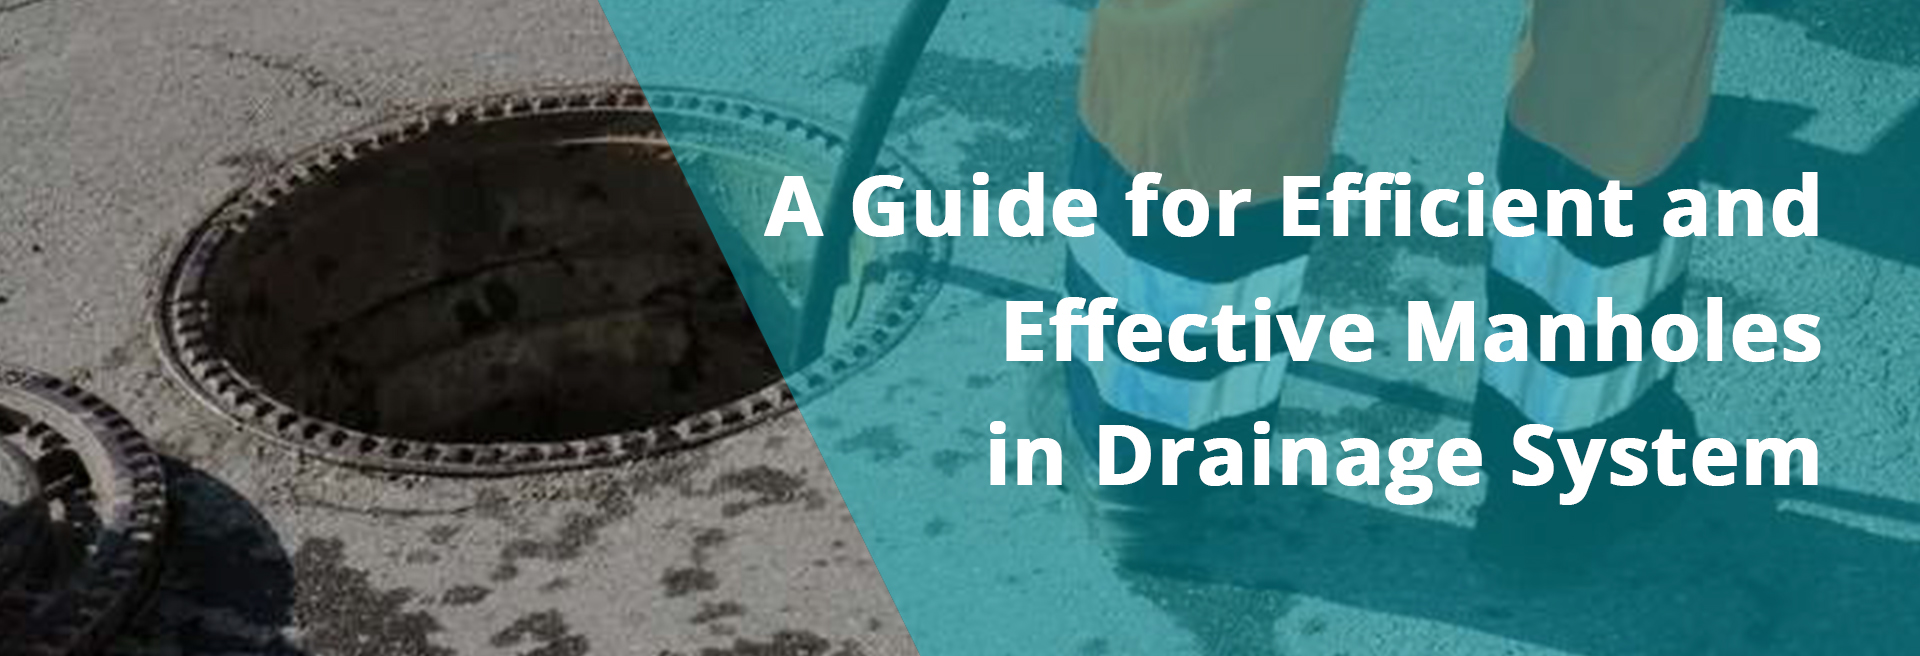 Guide for Efficient and Effective Manholes in Drainage System